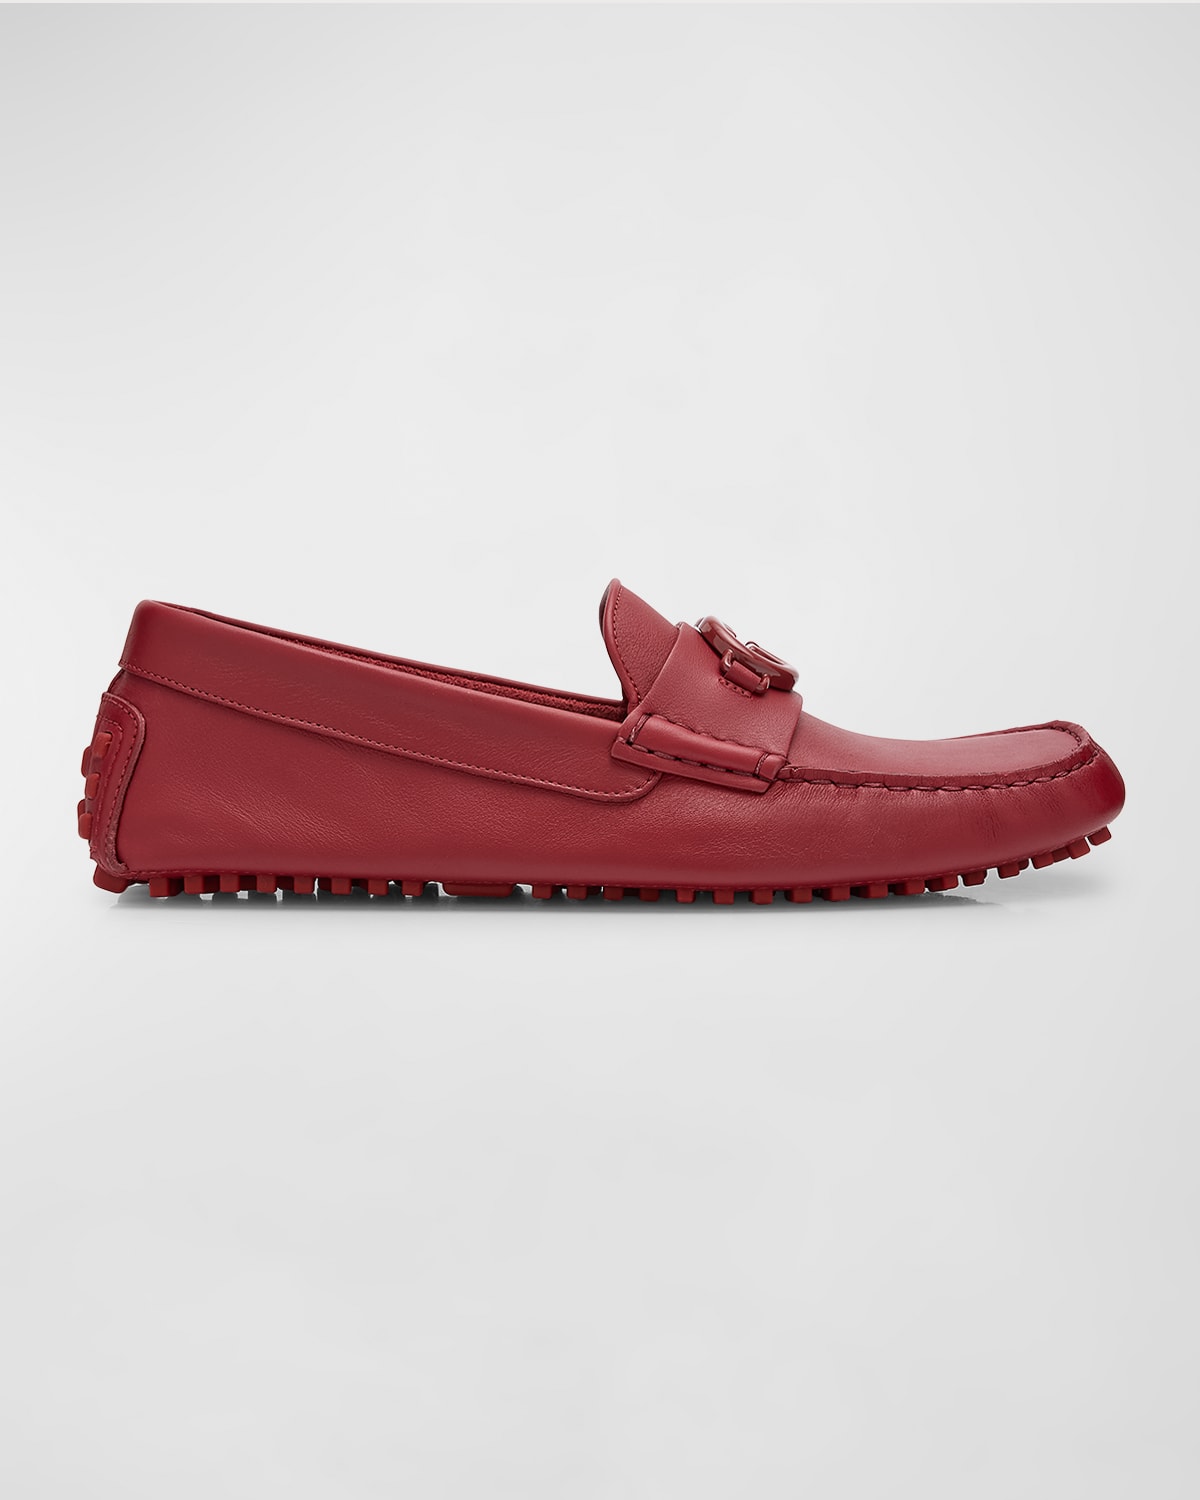 Gucci Men's Ayrton Interlocking G Leather Drivers In Red